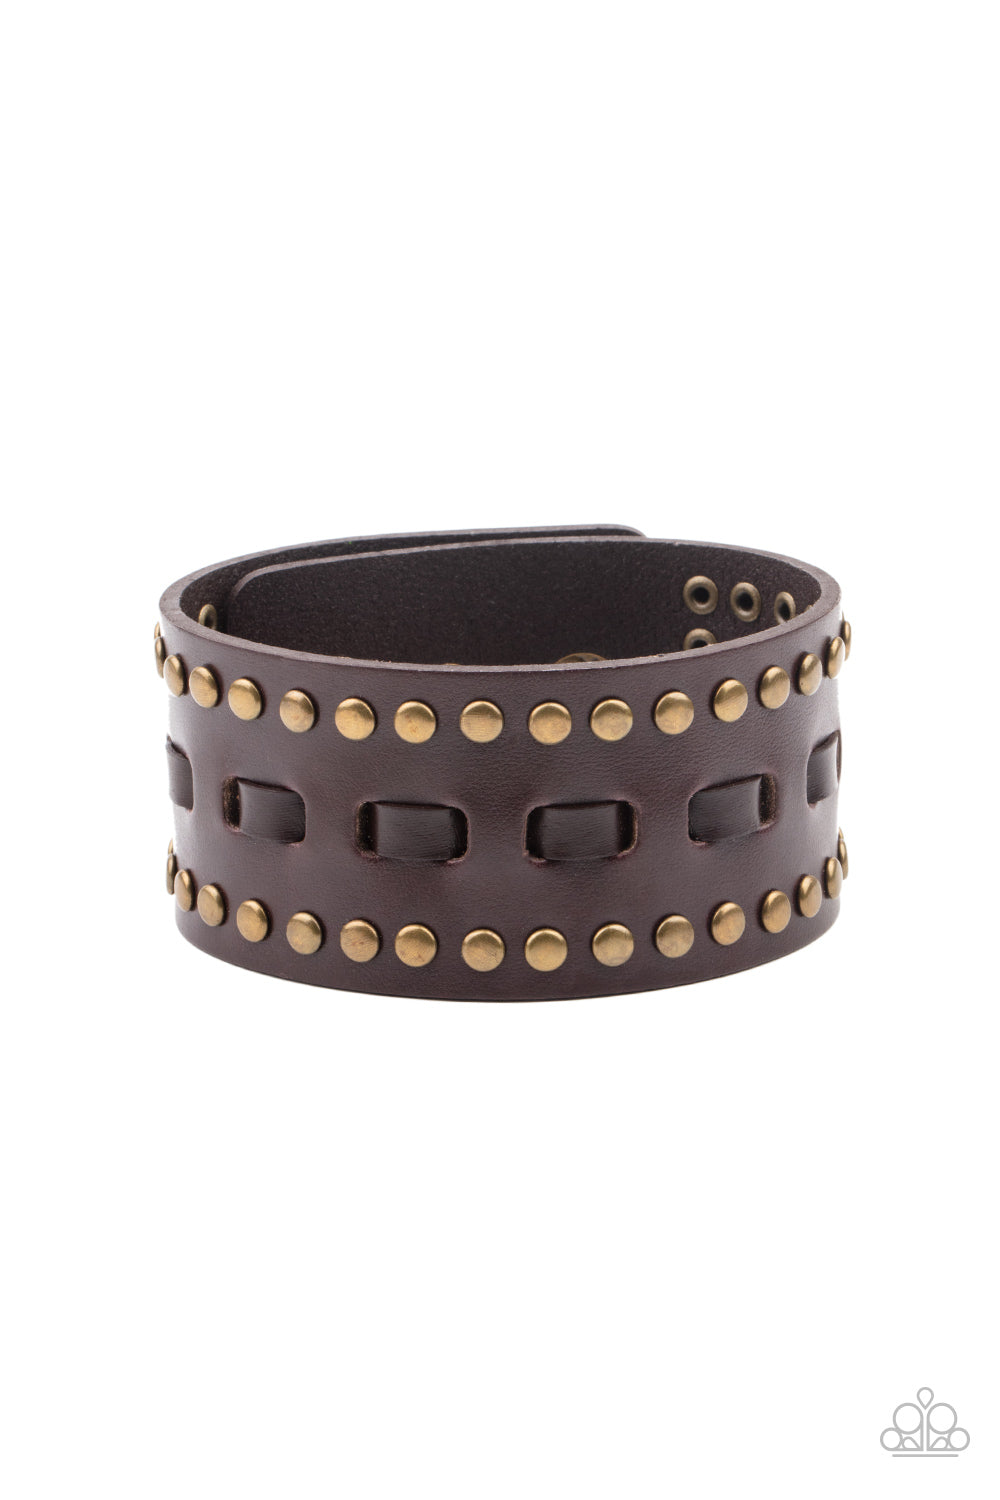 Brown laces are threaded through the center of a brown leather band that has been studded in brass accents, creating a rustic centerpiece around the wrist. Features an adjustable snap closure.